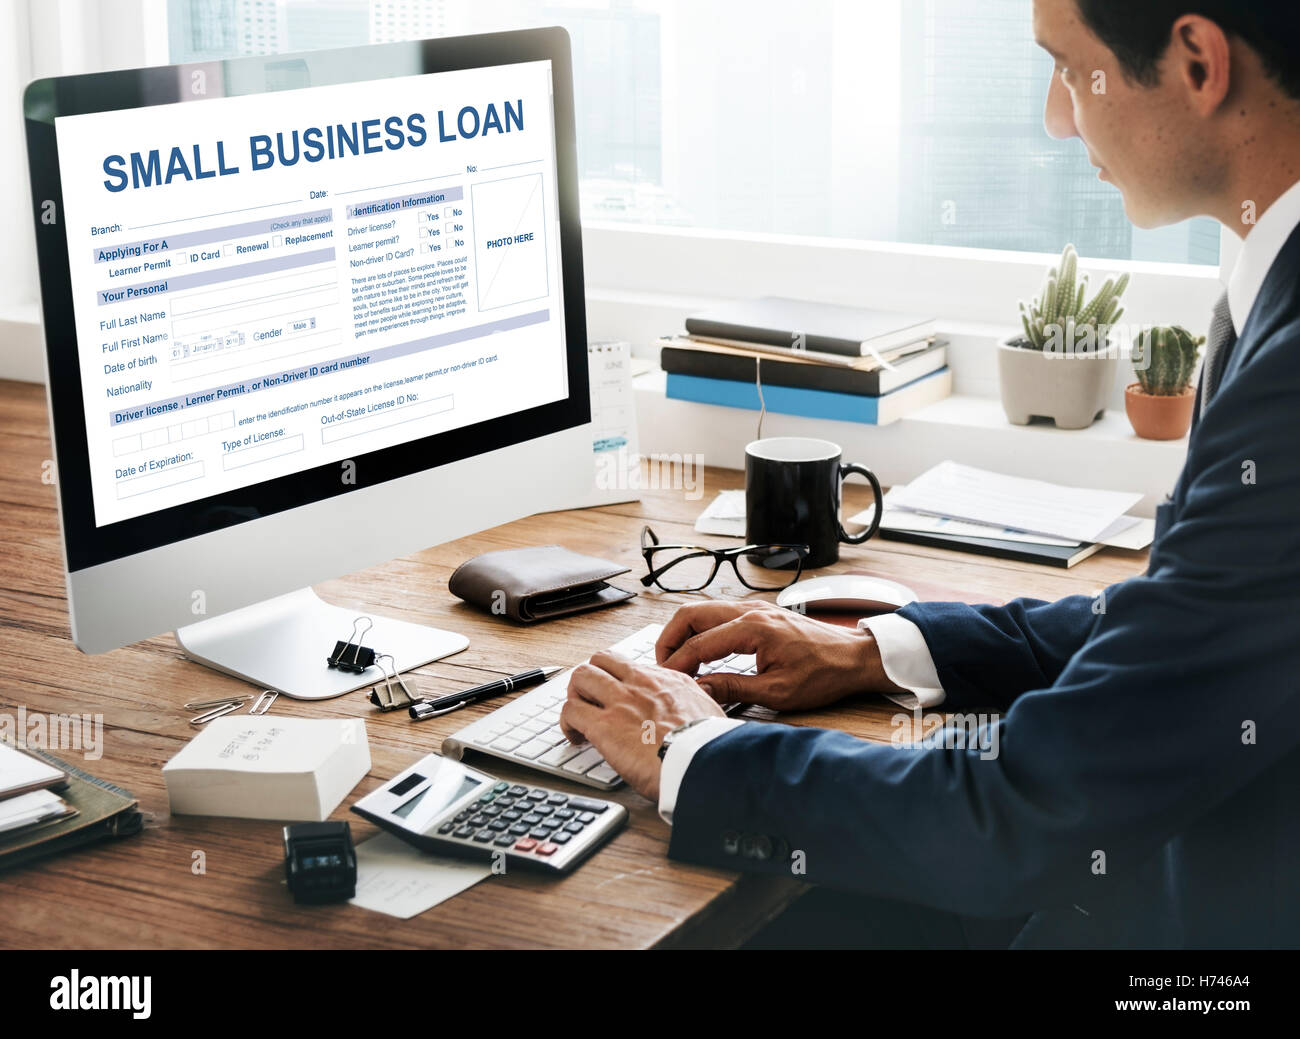 Small Business Loan Form Financial Concept Stock Photo